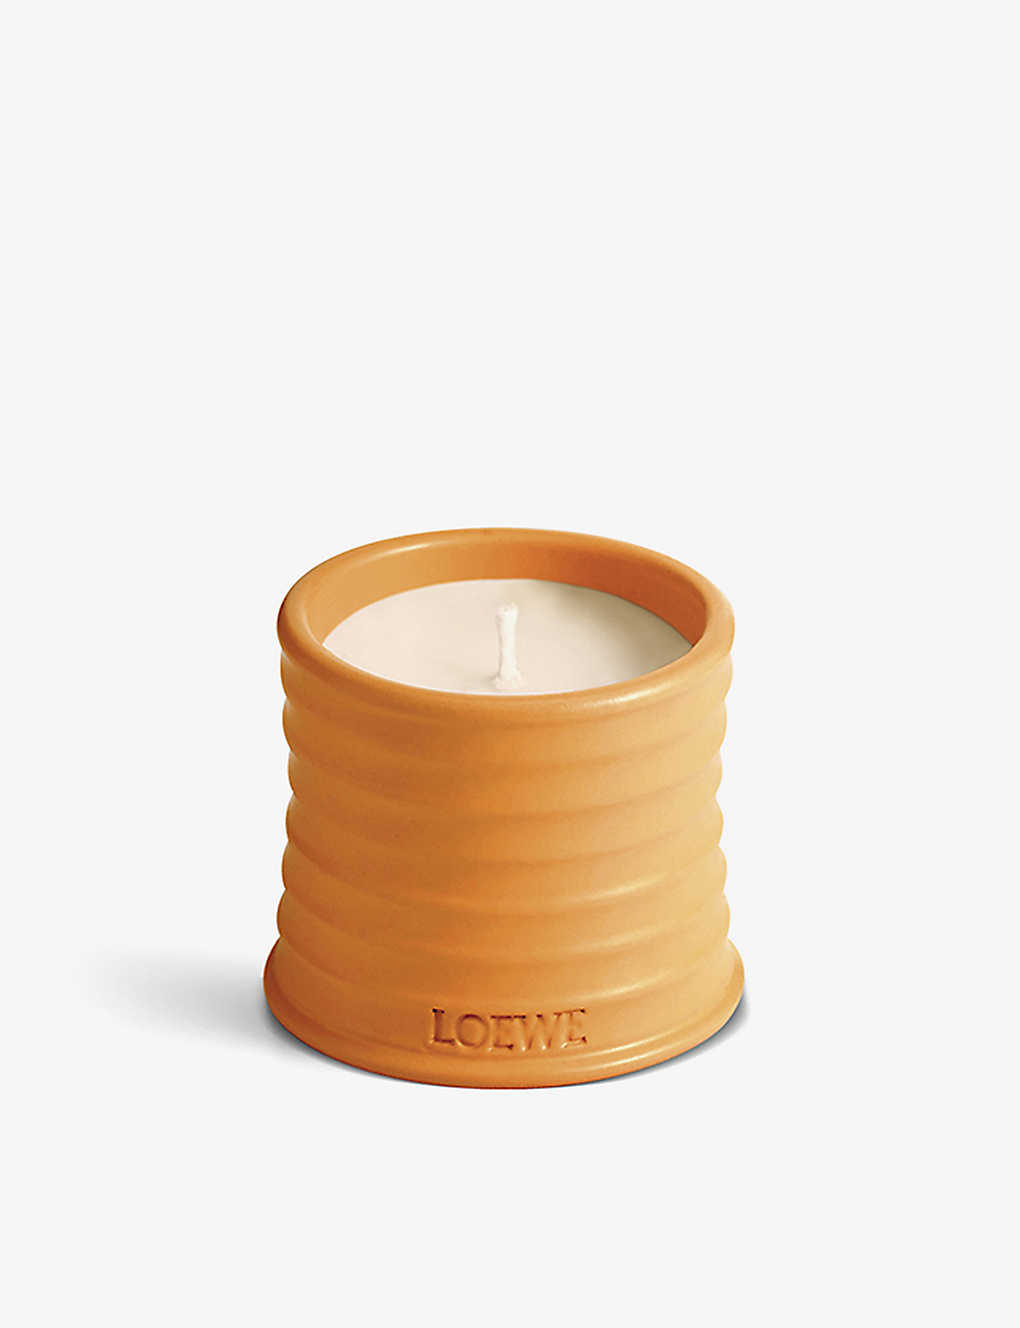 Loewe Orange Blossom Small Scented Candle 170g In Multi